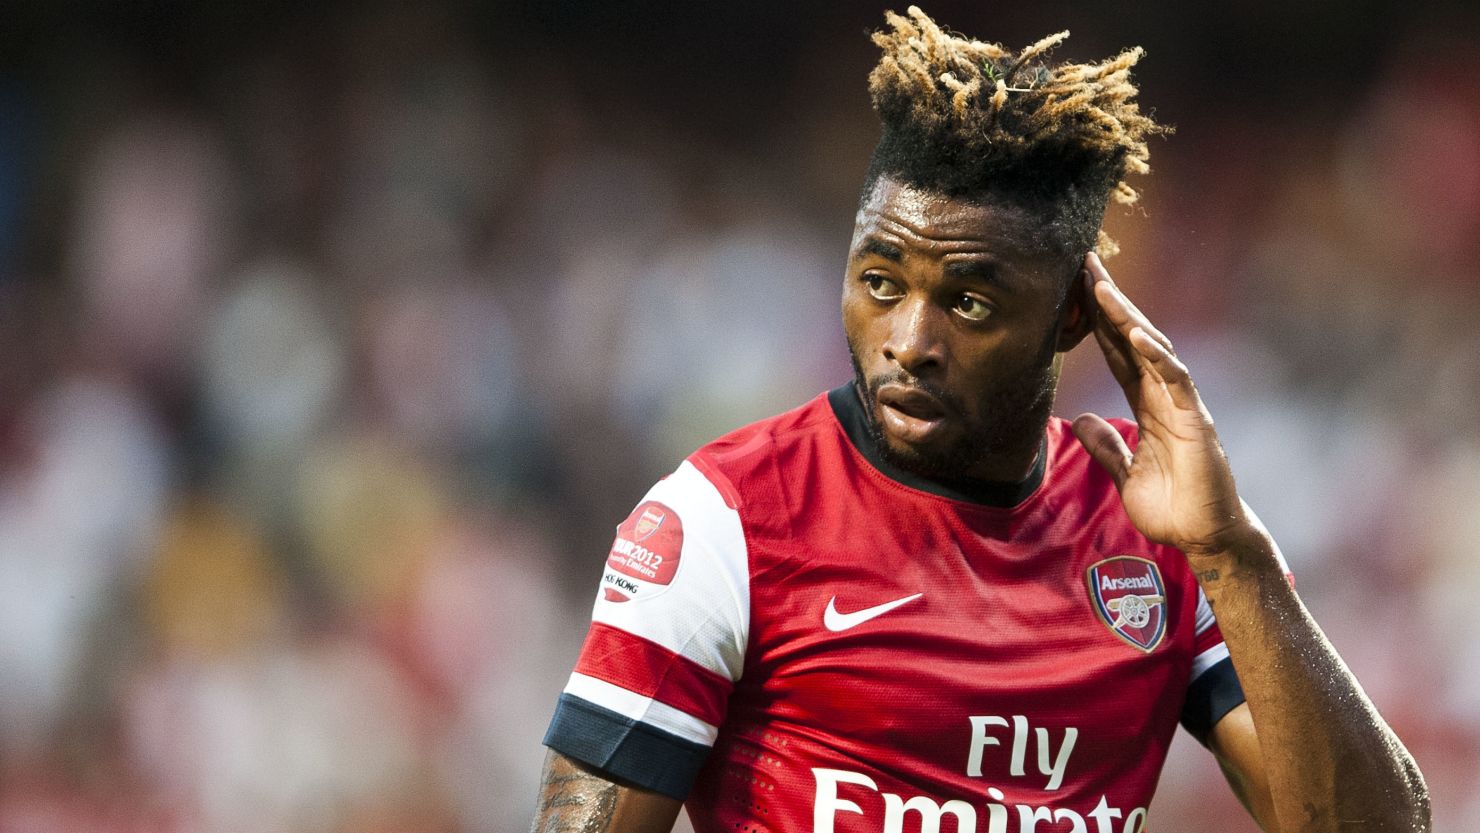 Alex Song will have a medical with Barcelona on Monday ahead of completing his move to the Spanish side